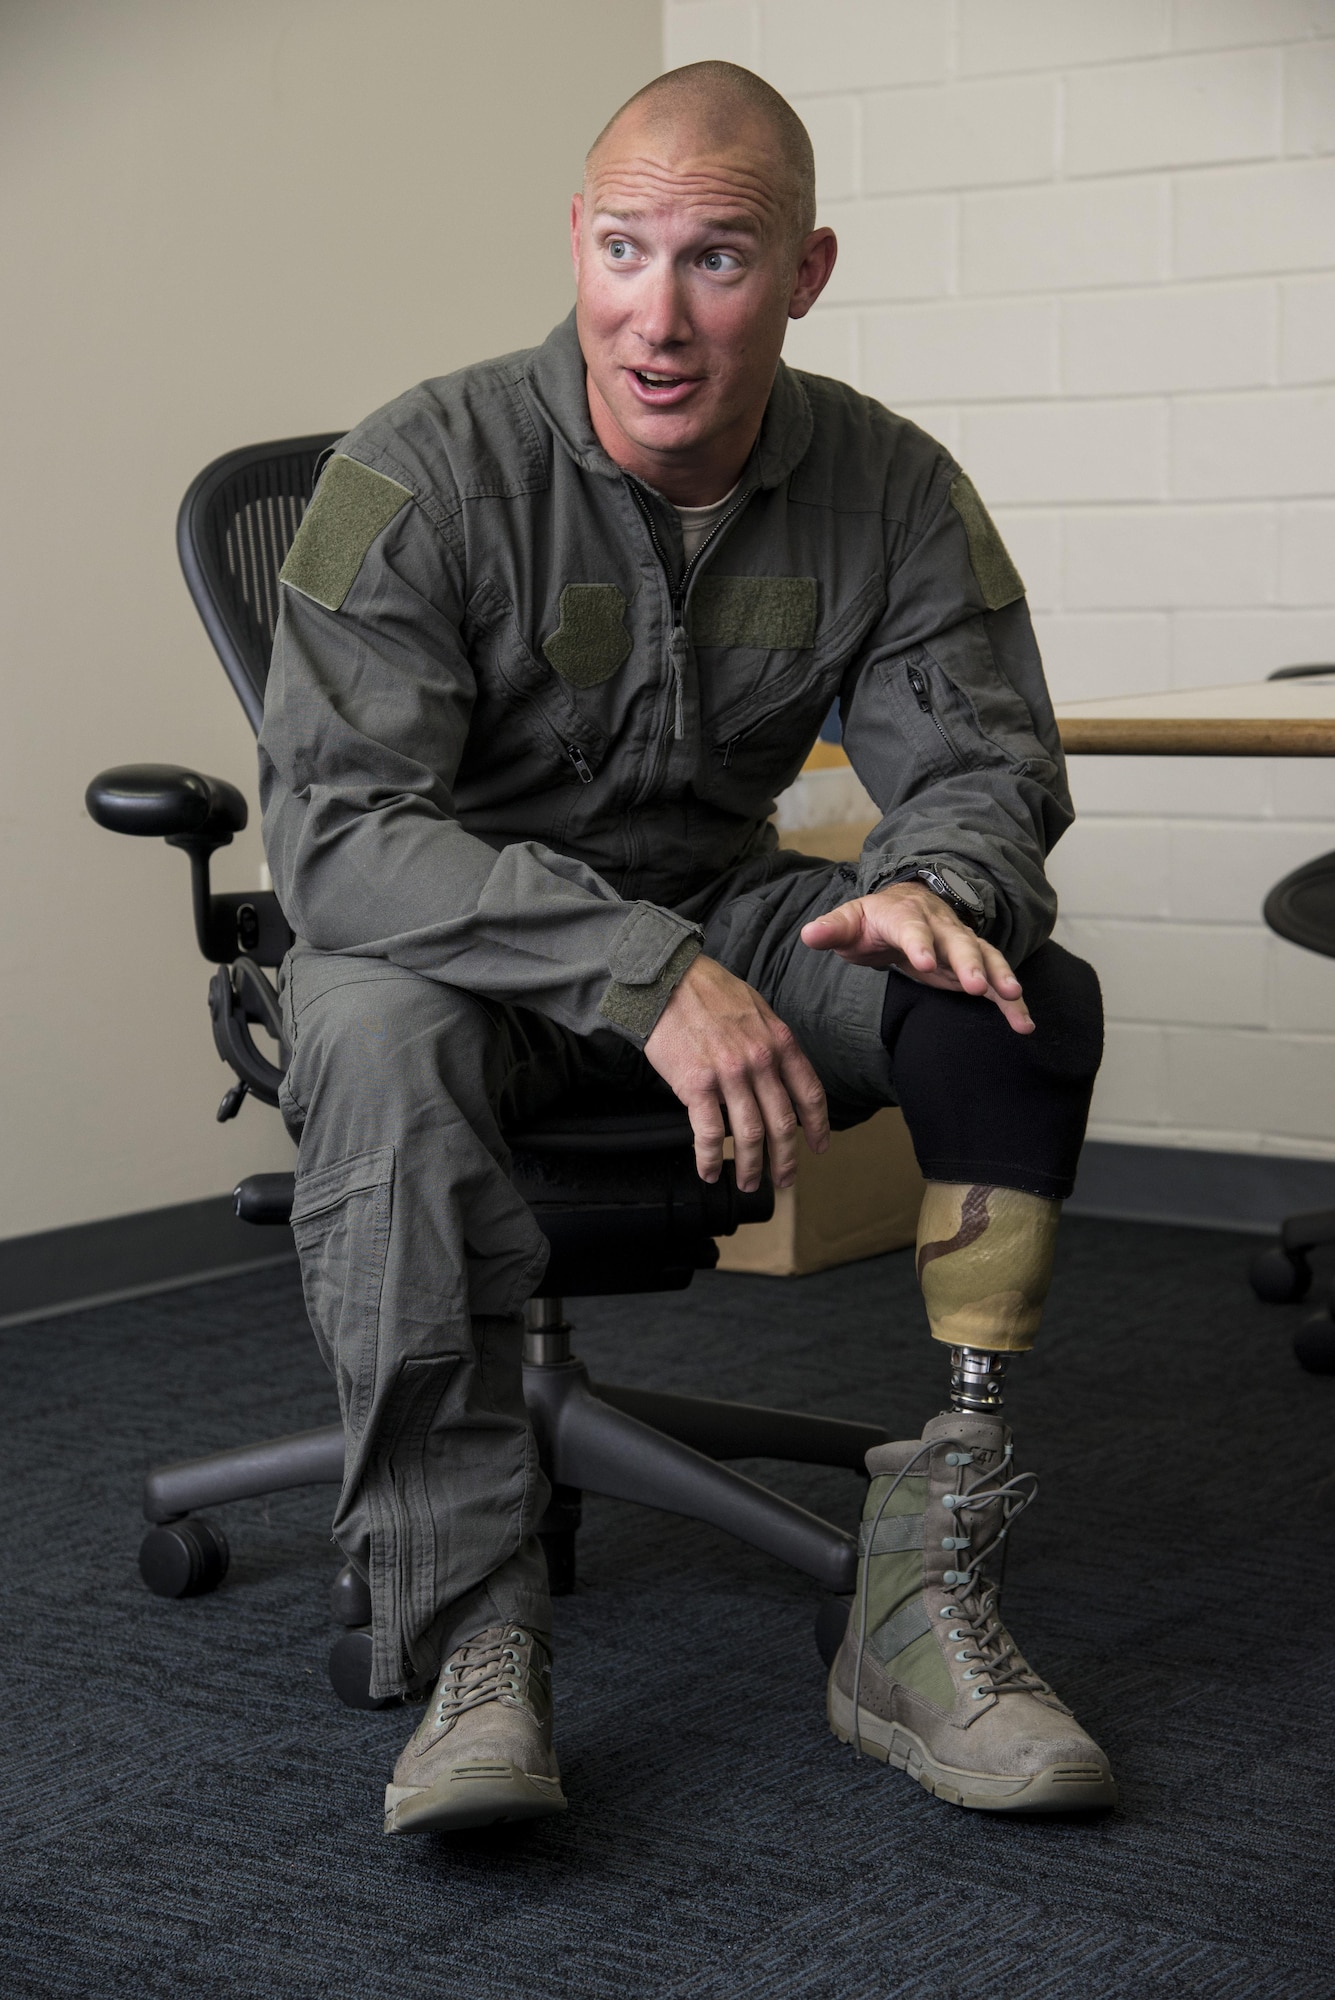 Air Force Master Sgt. Benjamin Seekell, 343rd Training Squadron security forces apprentice course flight chief and Wounded Warrior, dons a flight suit before his incentive flight with the U.S. Air Force Aerial Demonstration Squadron “Thunderbirds” Nov. 2, 2017, at Joint Base San Antonio-Kelly Field, Texas. During a 2011 deployment to Afghanistan, Seekell, who was serving as a military working dog handler, was injured in an improvised explosive device attack and lost his left leg. (U.S. Air Force photo by Senior Airman Stormy Archer)